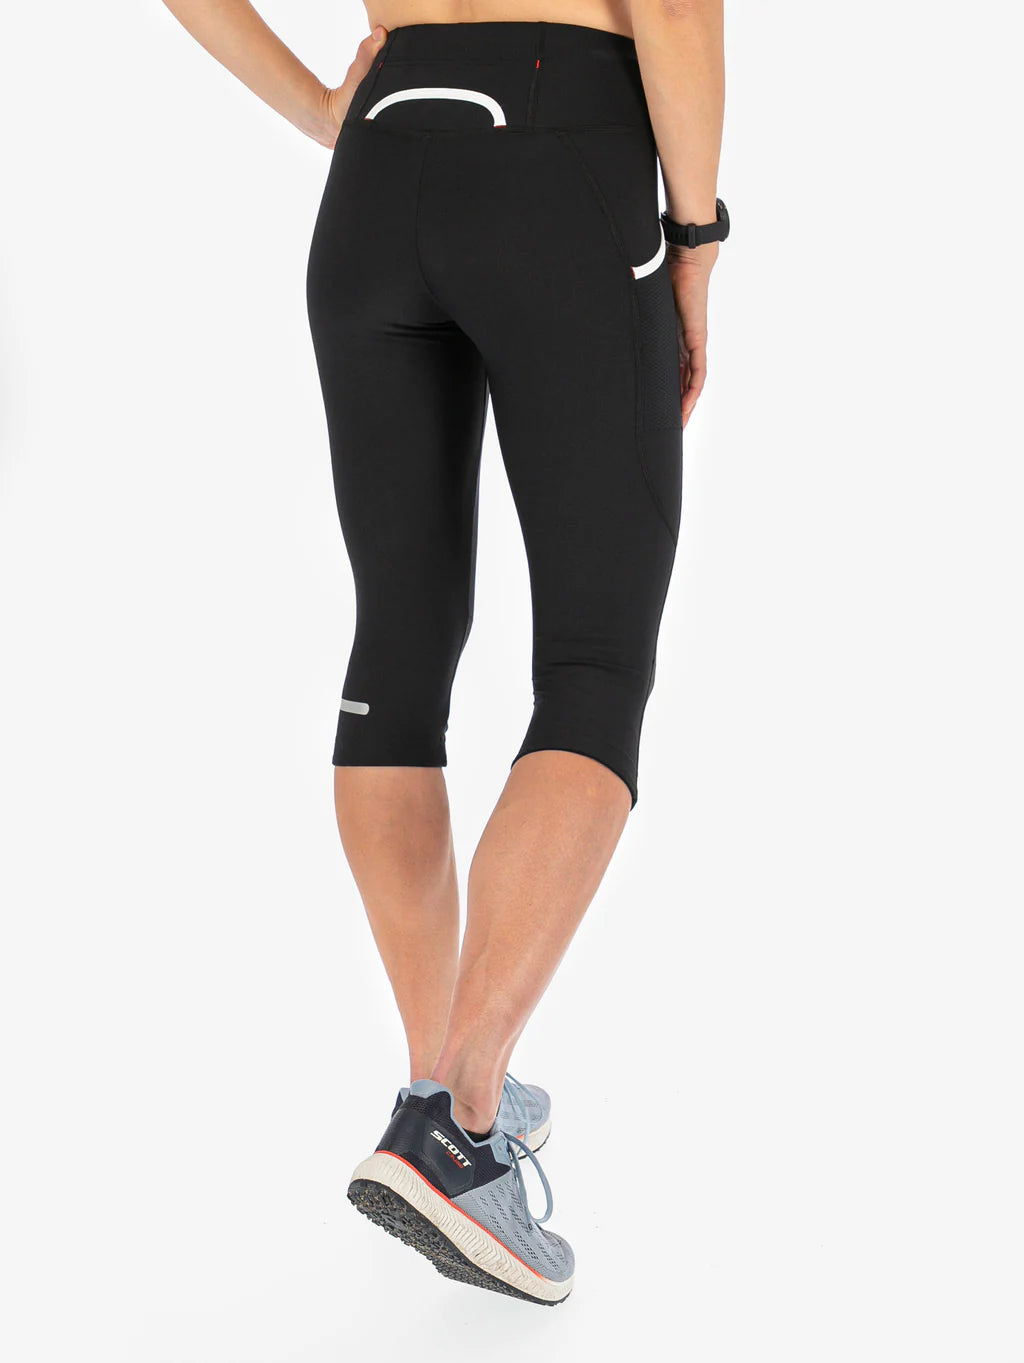 FUSION C3 Running Tights 3/4 length with side Pockets - FM Sports